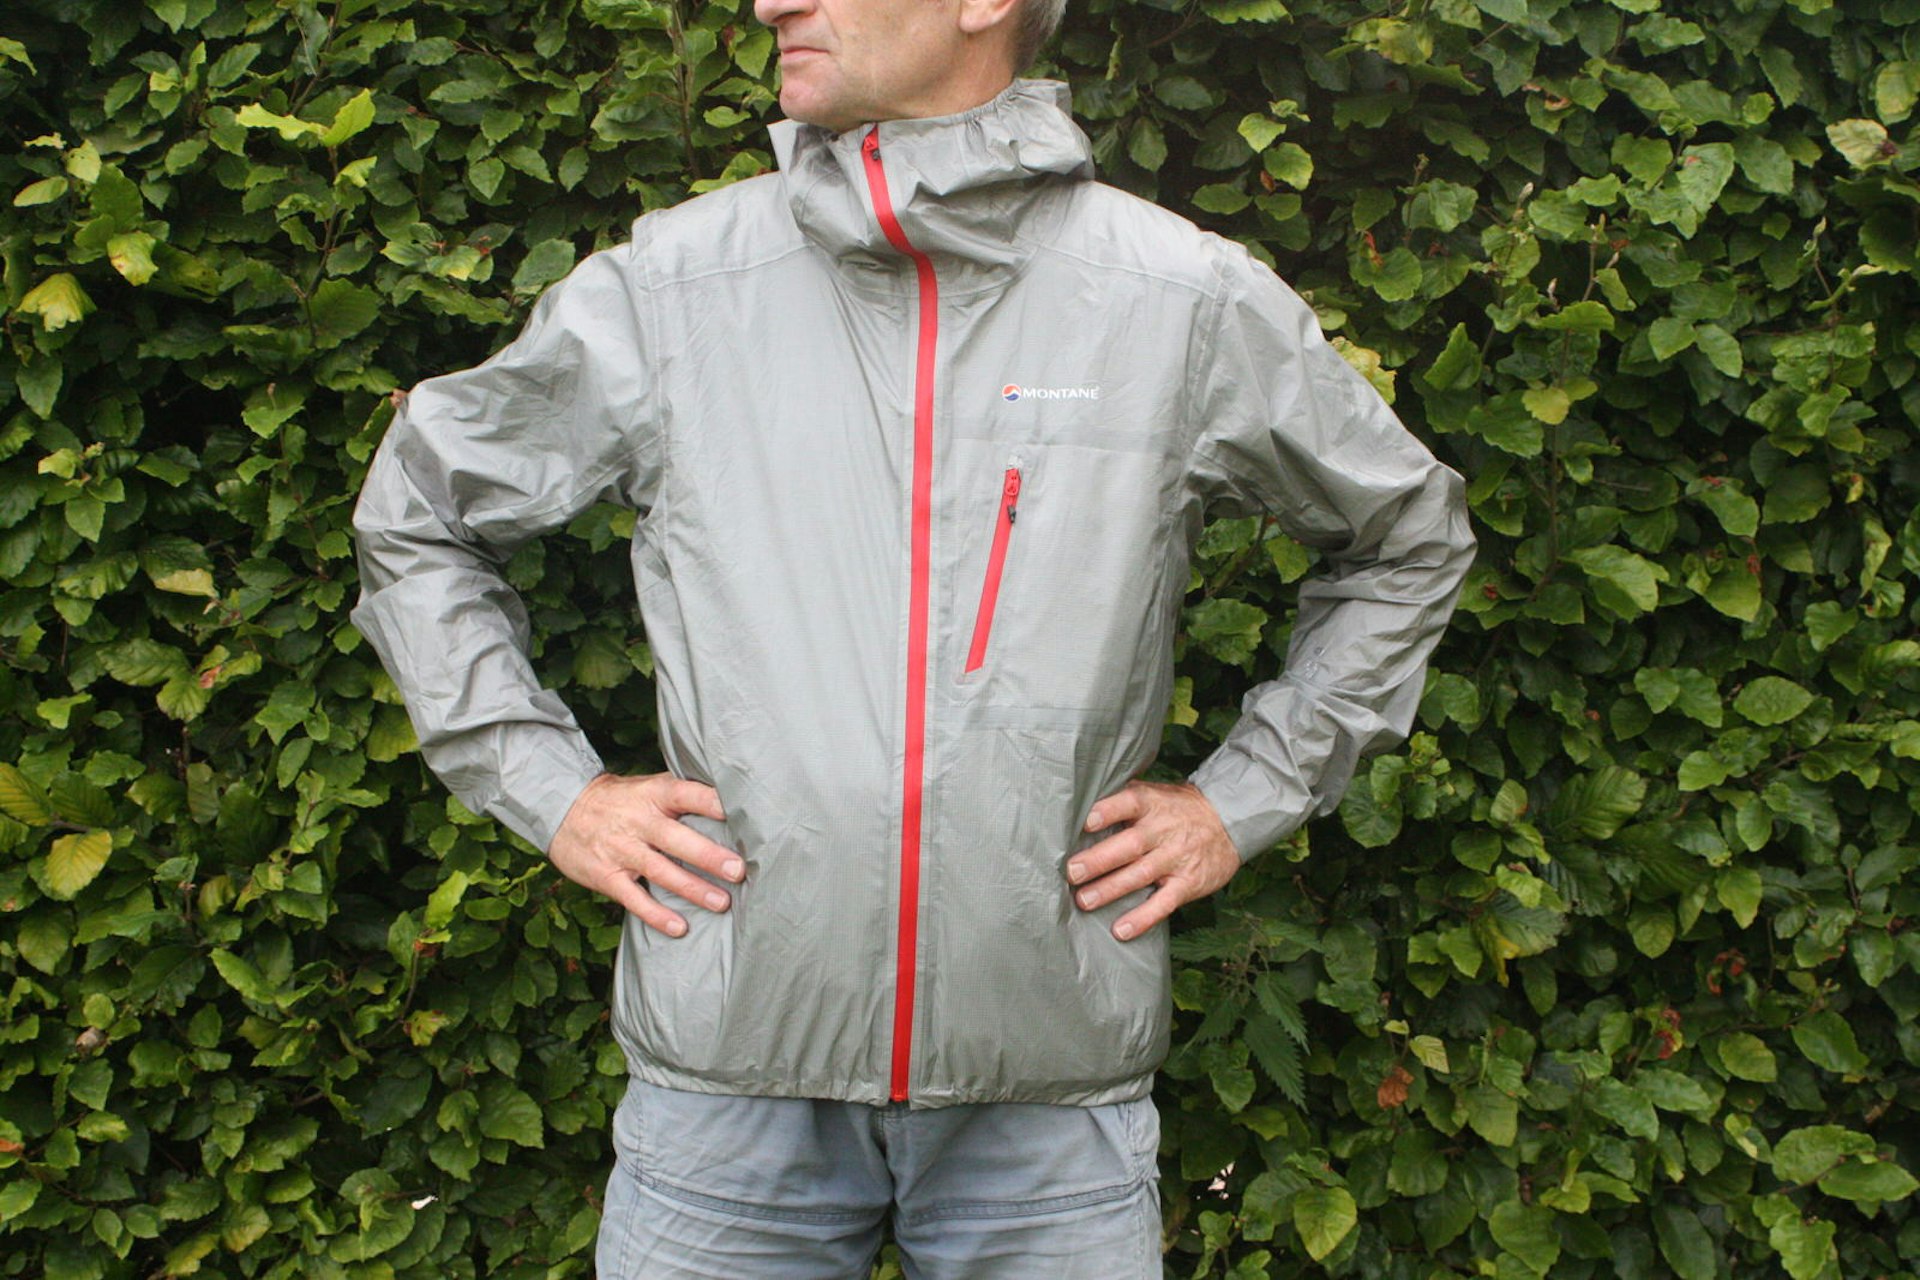 The Montane Minimus 777 jacket combines weather protection, light weight and compact size © David Else / Lonely Planet